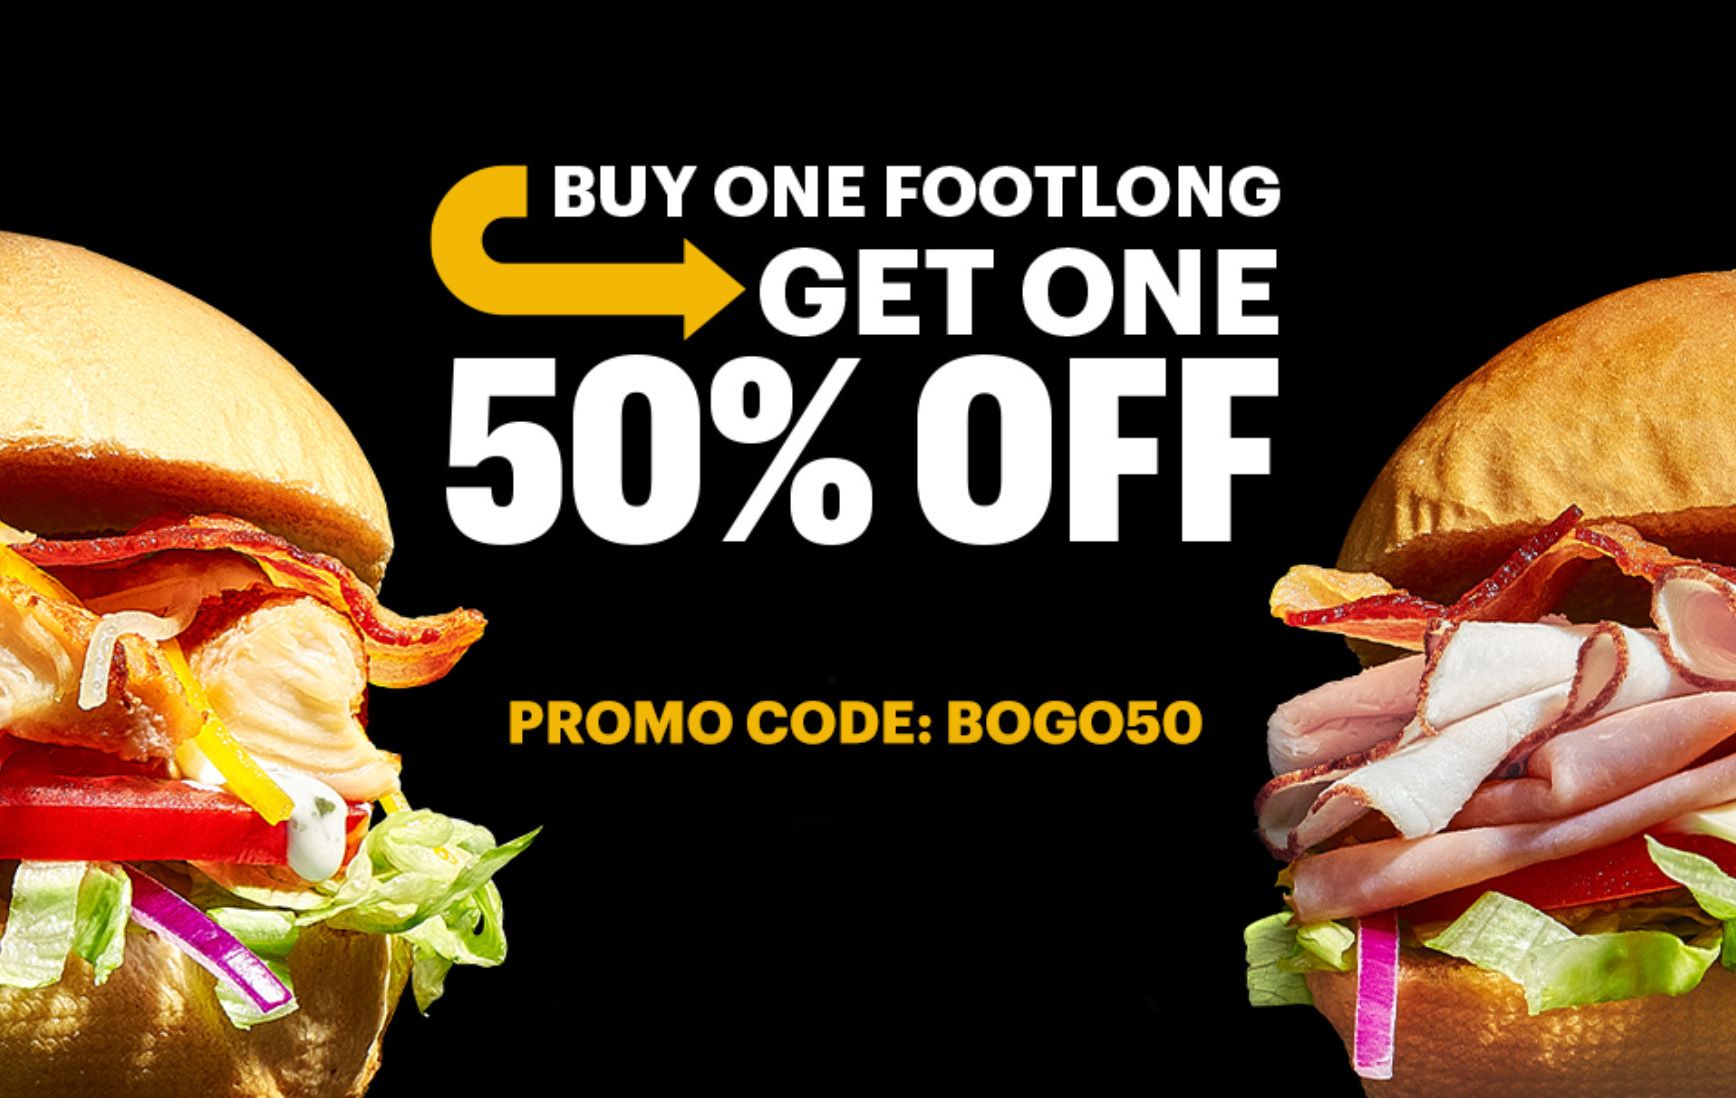 Subway Extends Their Popular Buy One Get One 50% Off Promo Code with Online and In-app Purchases